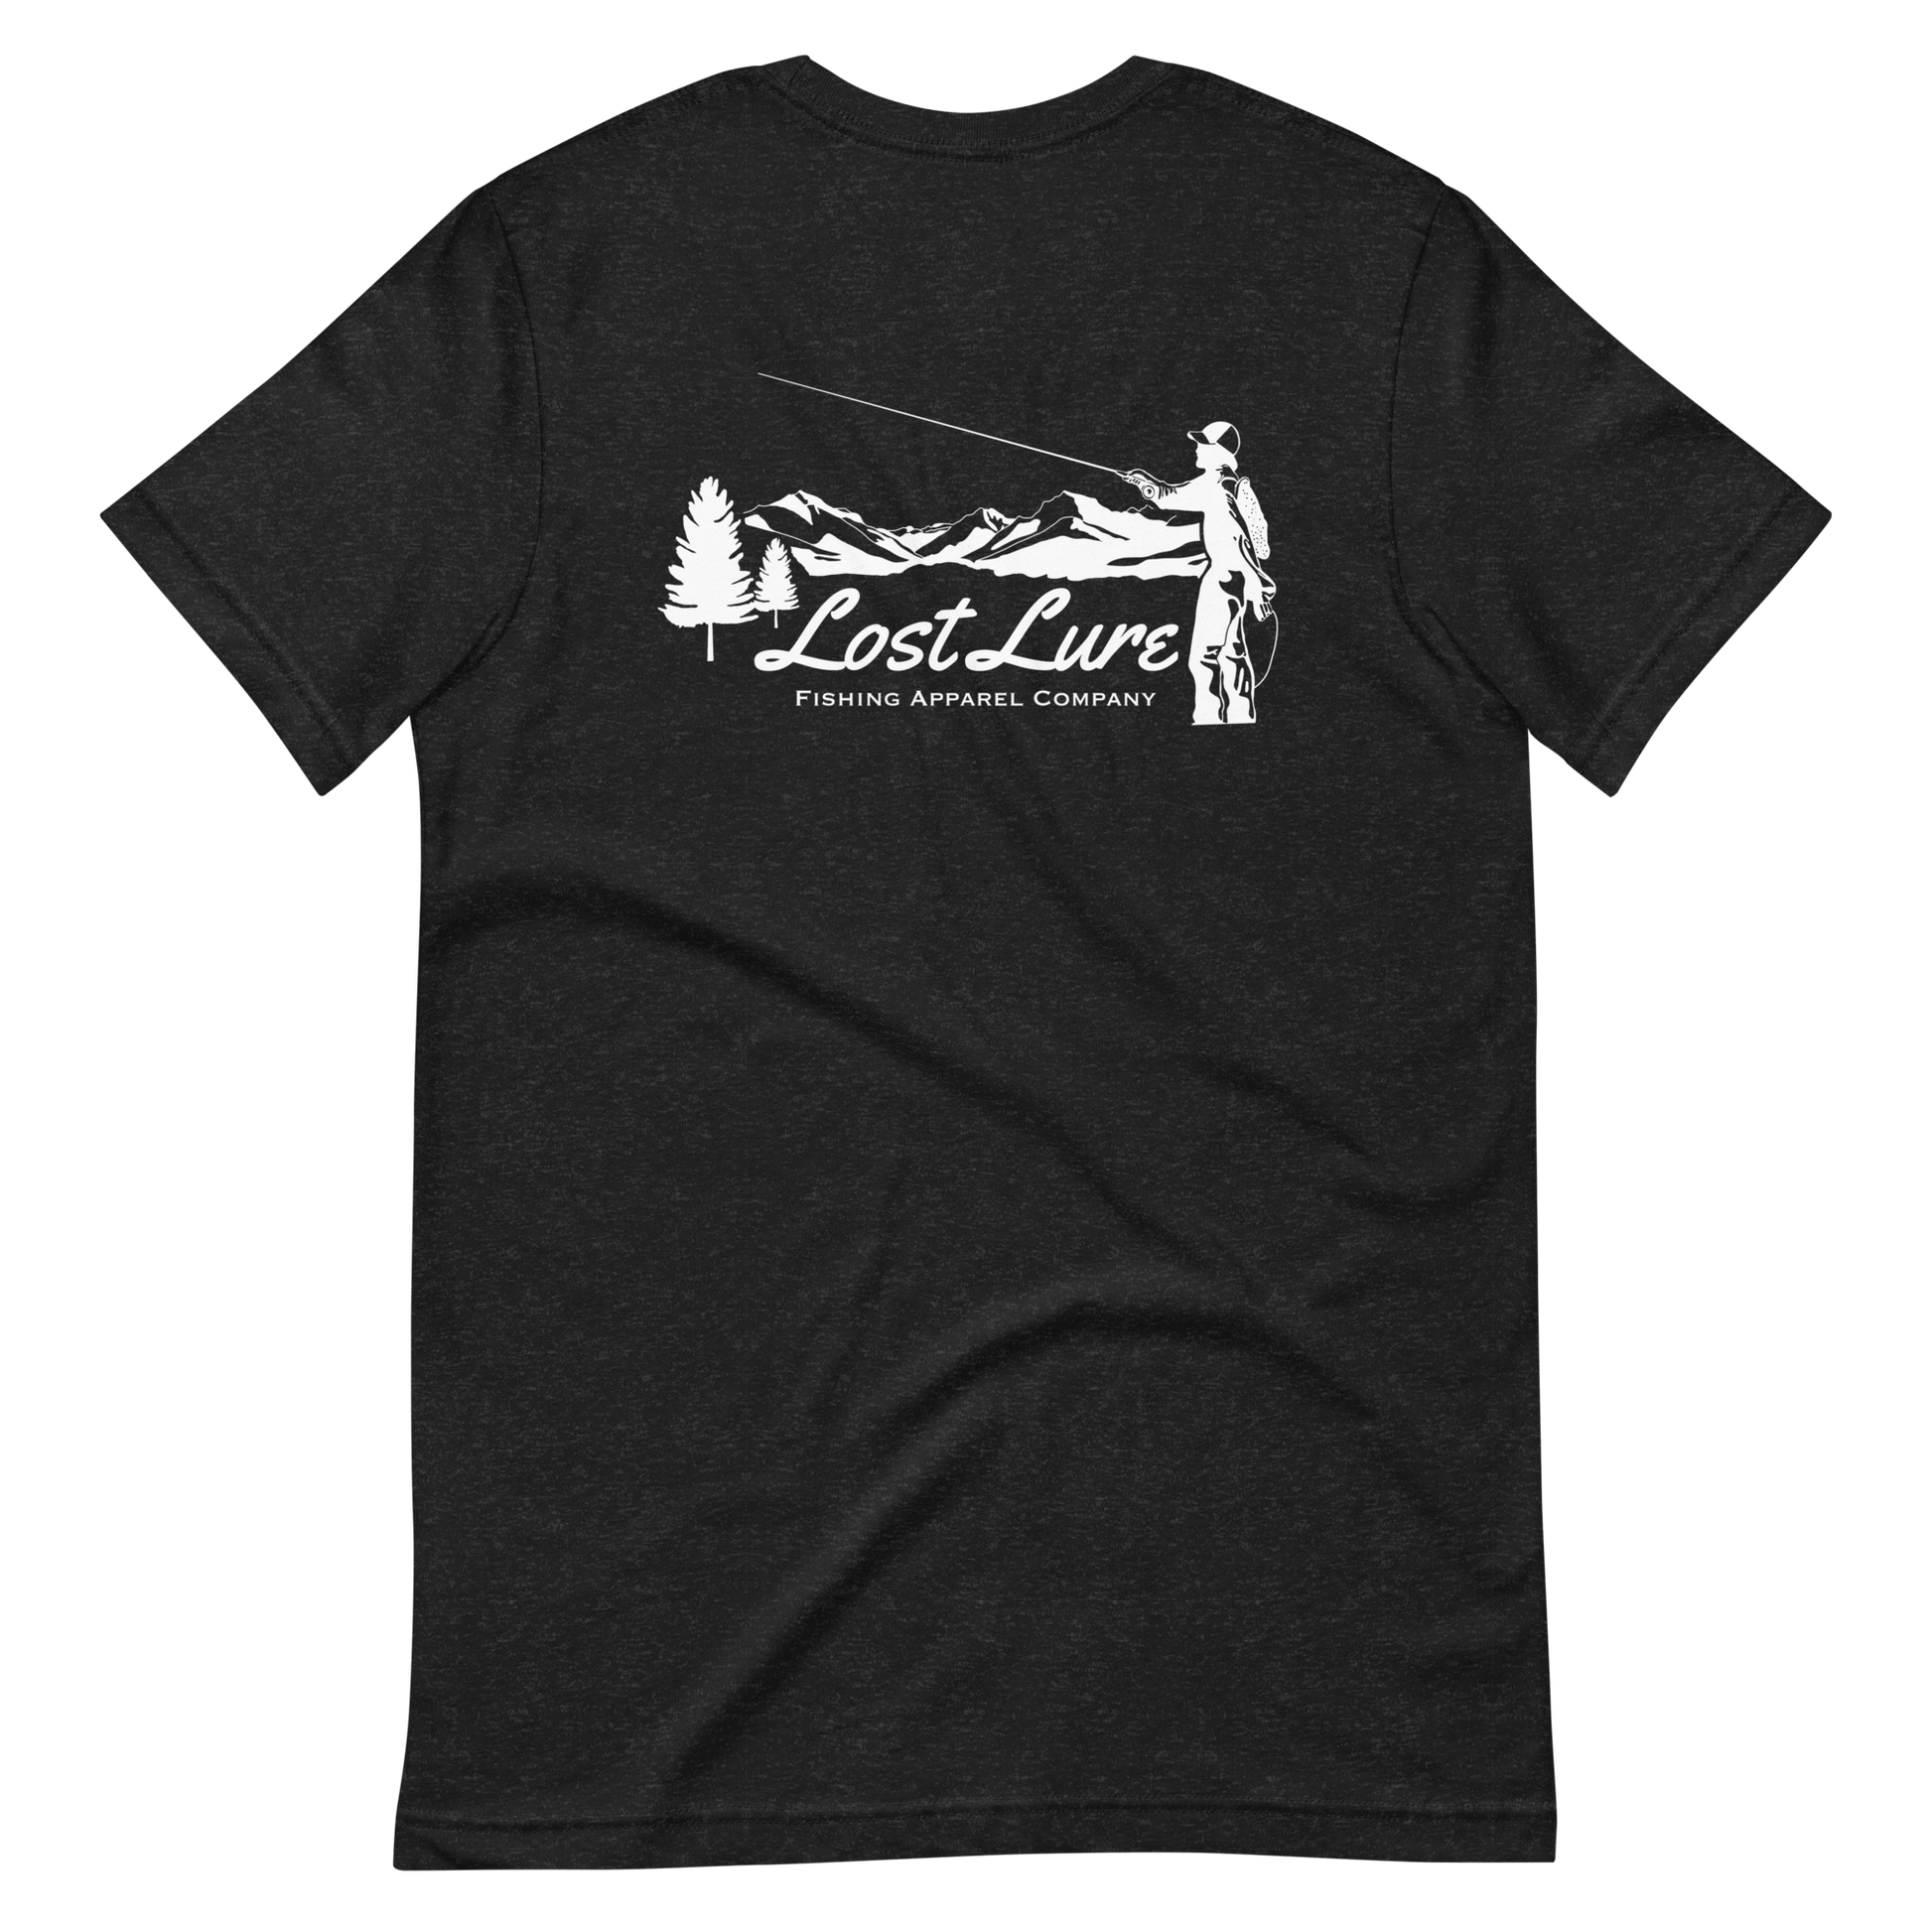 Fly fishing Lost lure shirt. It has a design on the back of the shirt black and white outline a fly fisherman and the Rocky Mountains. Dark grey fishing shirt, back side